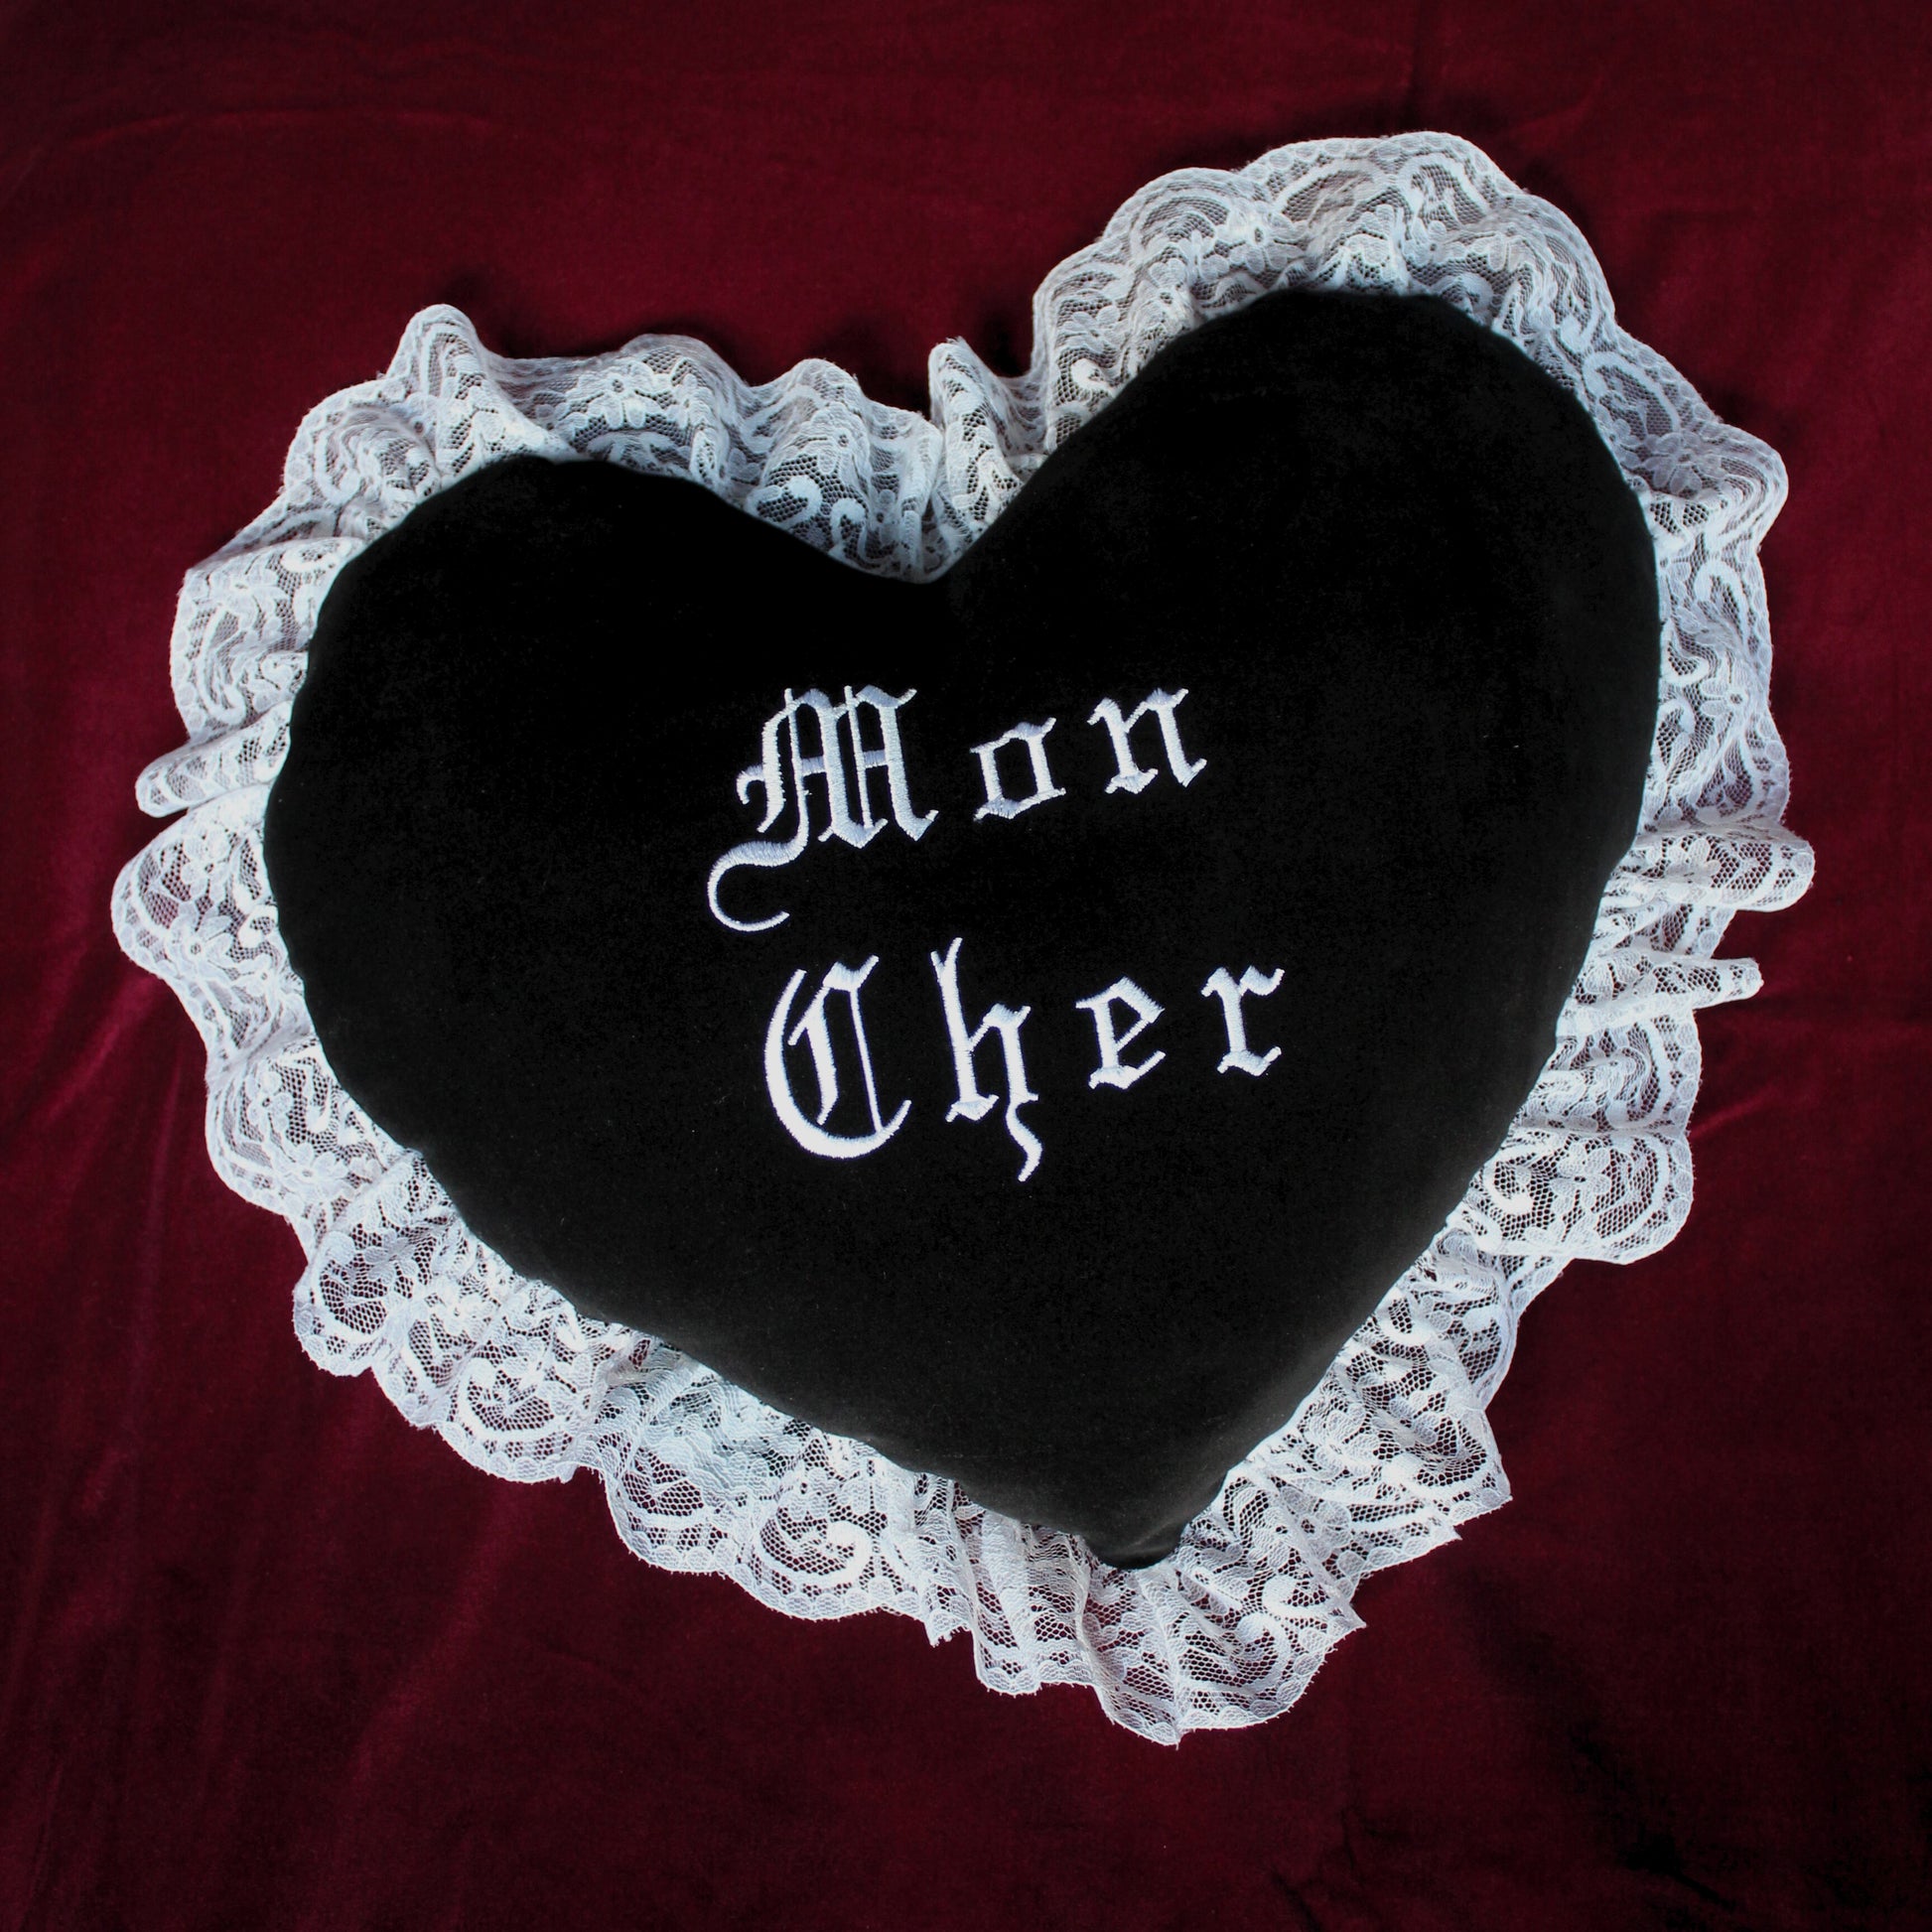 A black velvet heart, trimmed in pretty white lace, with Mon Cher embroidered in the centre, as Morticia calls Gomez in the Addams family.